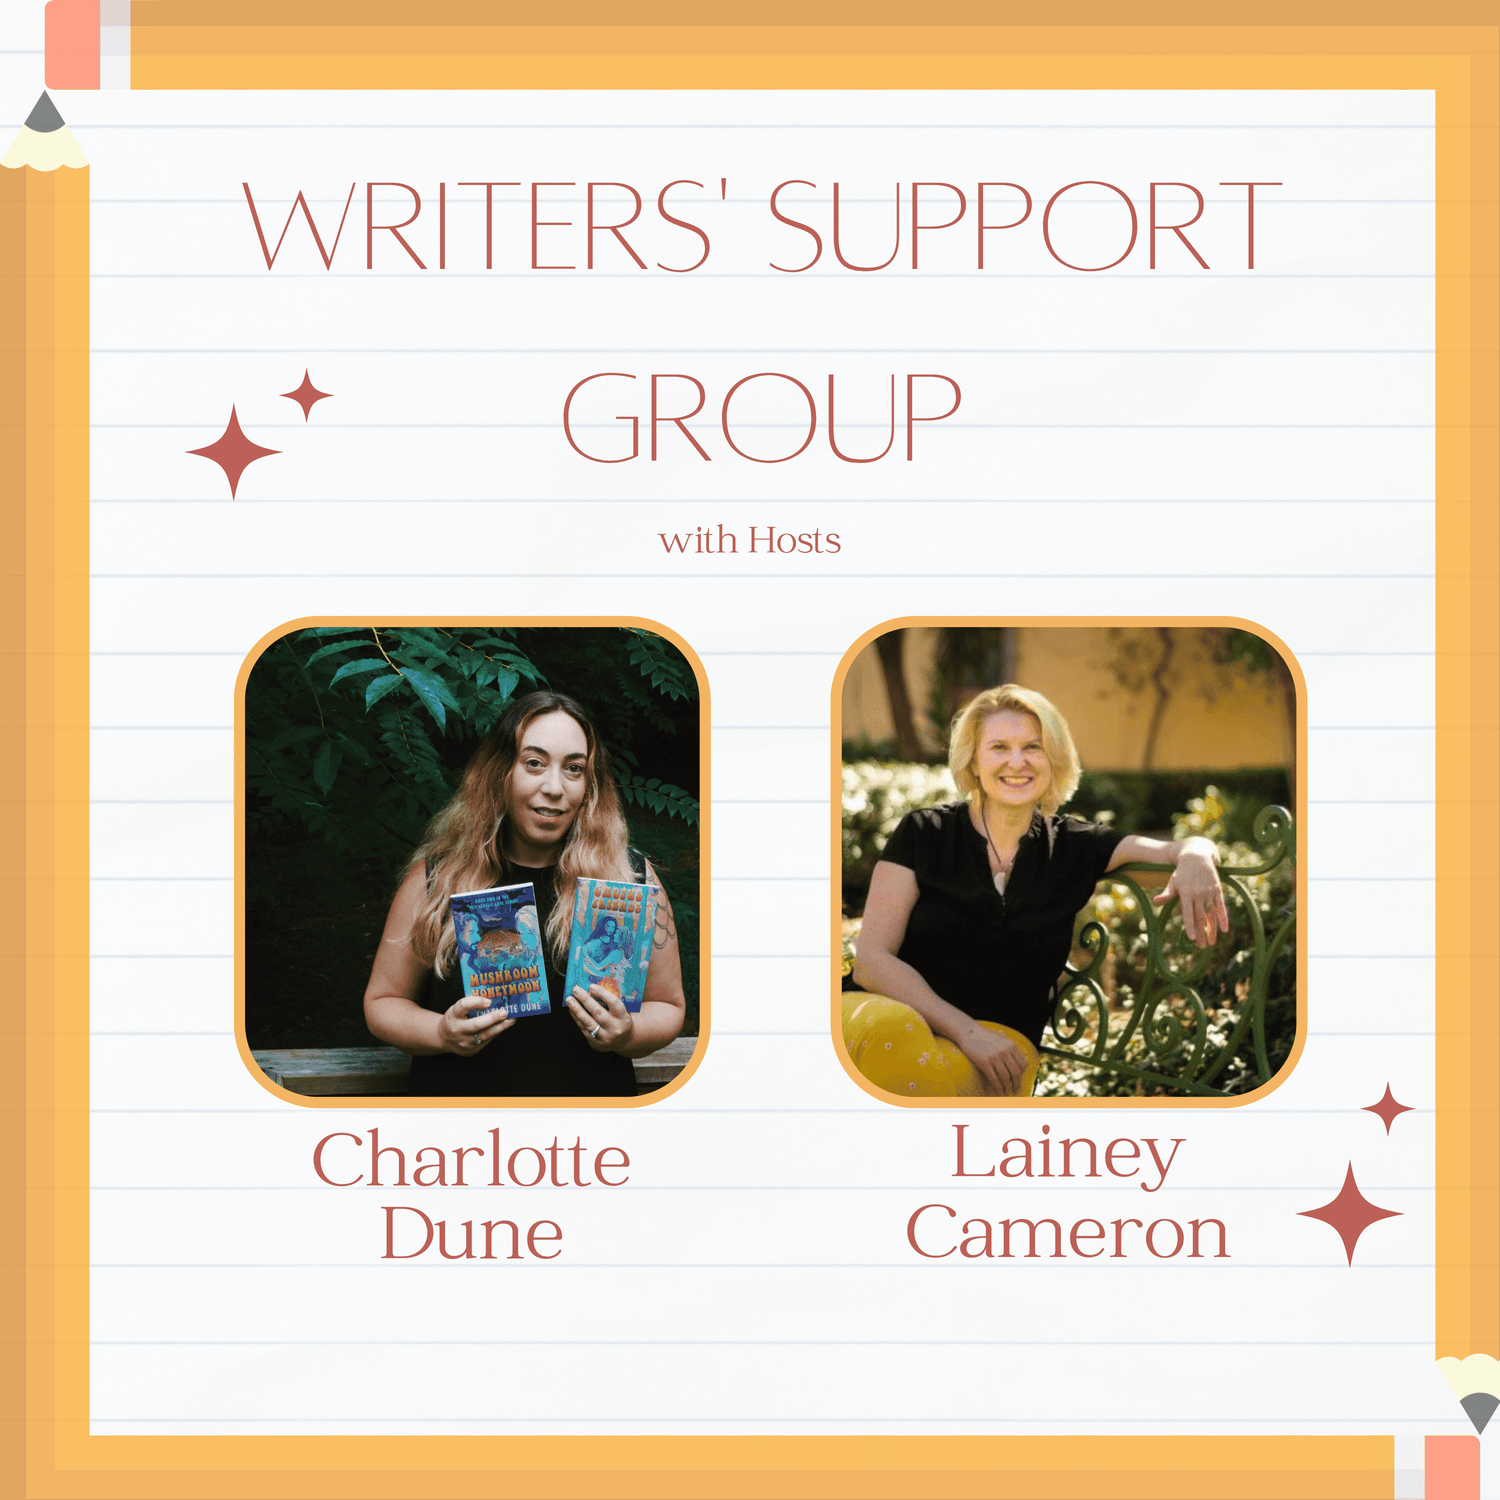 The Writers Support Group with Authors Lainey Cameron and Charlotte Dune